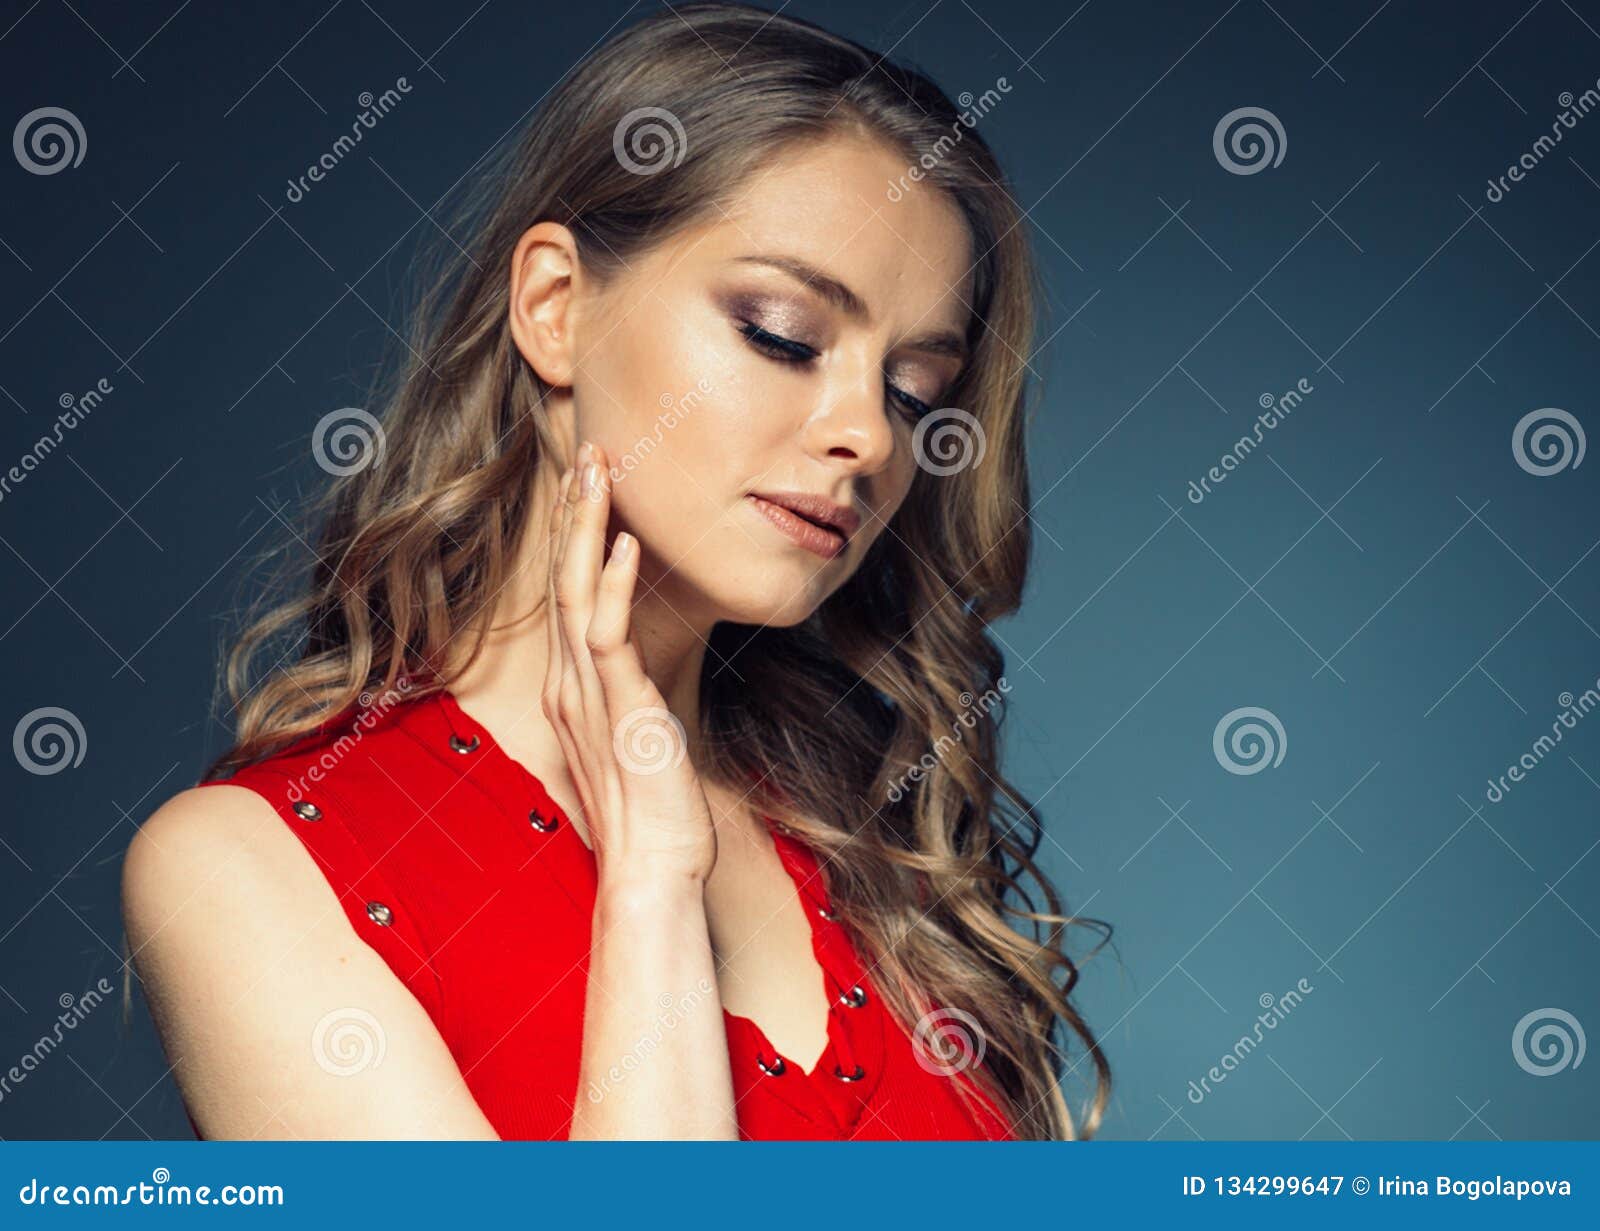 Woman in Red Dress with Long Blonde Hair Stock Image - Image of ...